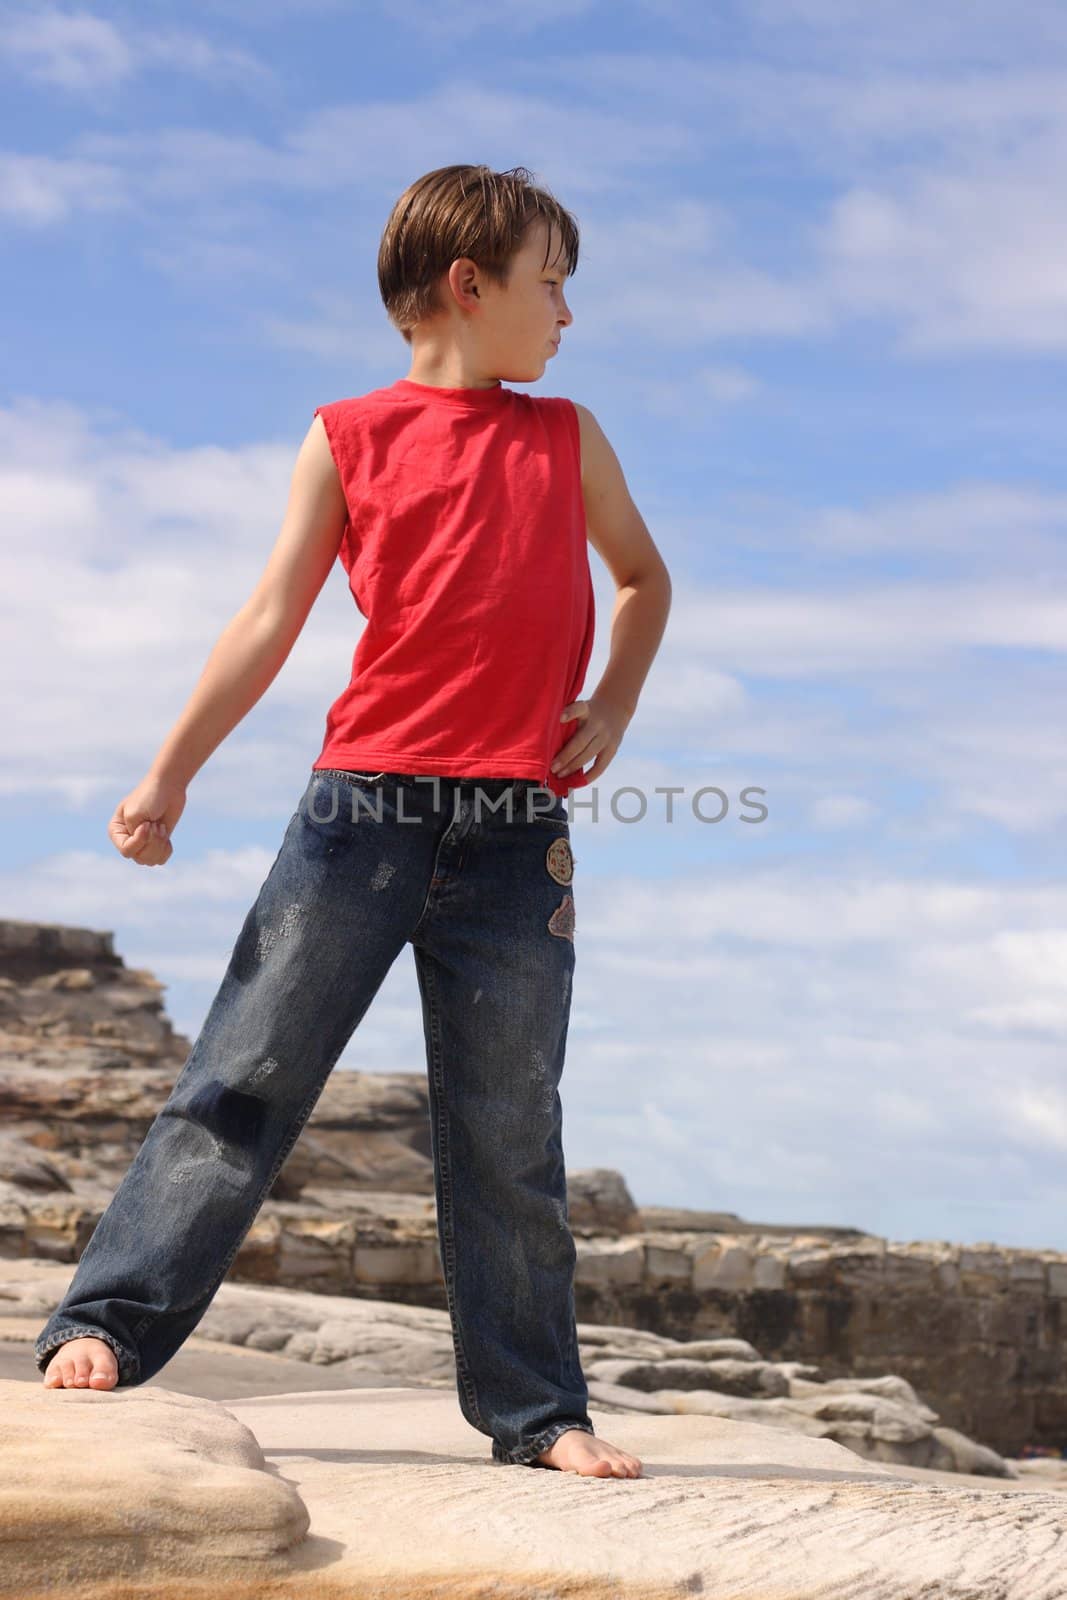 Child outdoors in the summer sun standing on rocks with a pretty blue sky and clouds behind him.